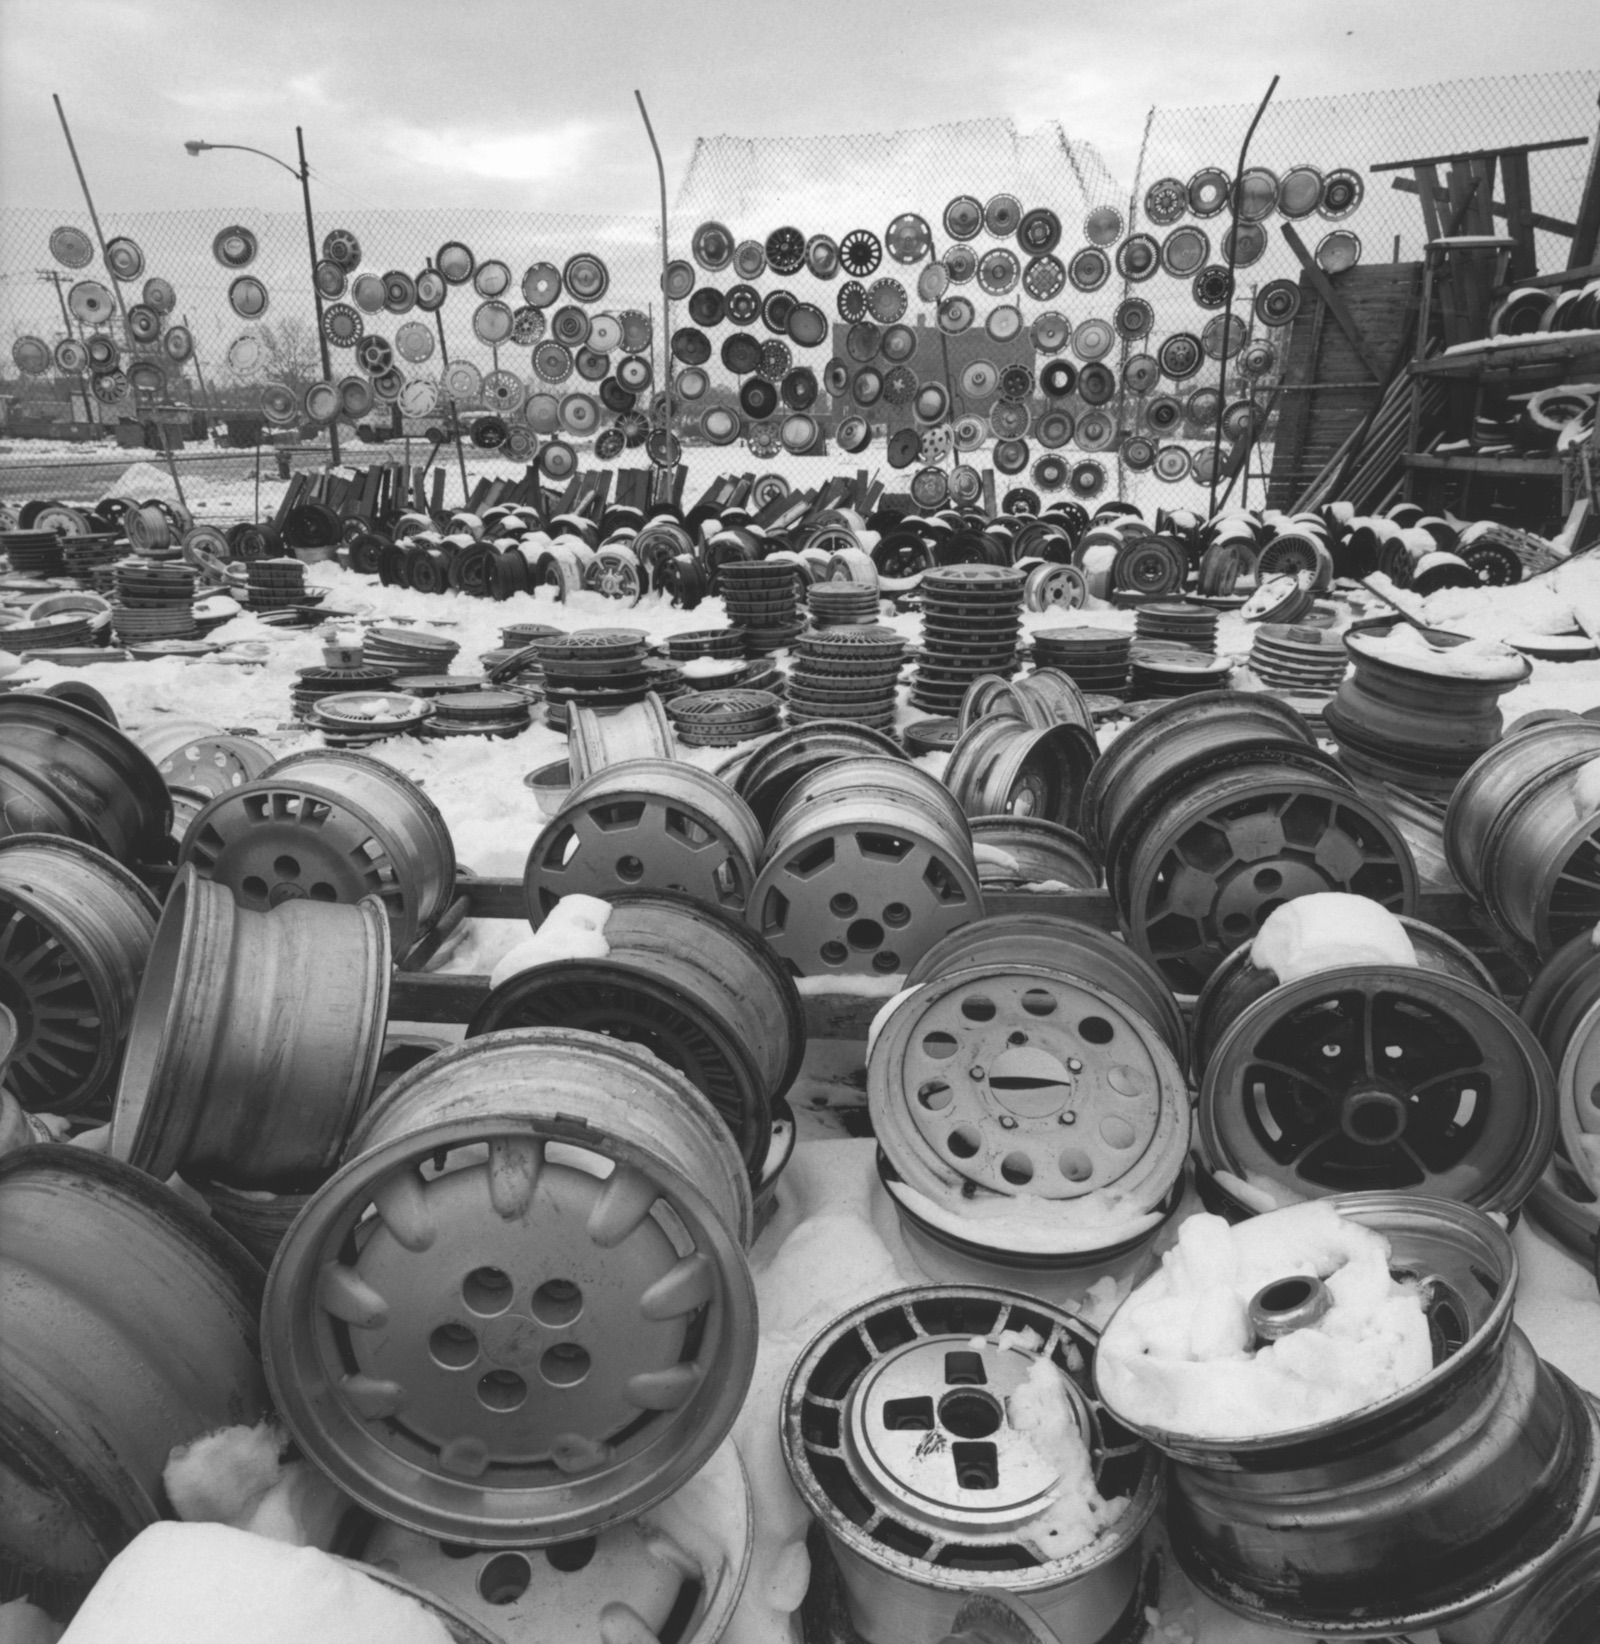 Wheels and hubcaps, old Maxwell Street market, 1991